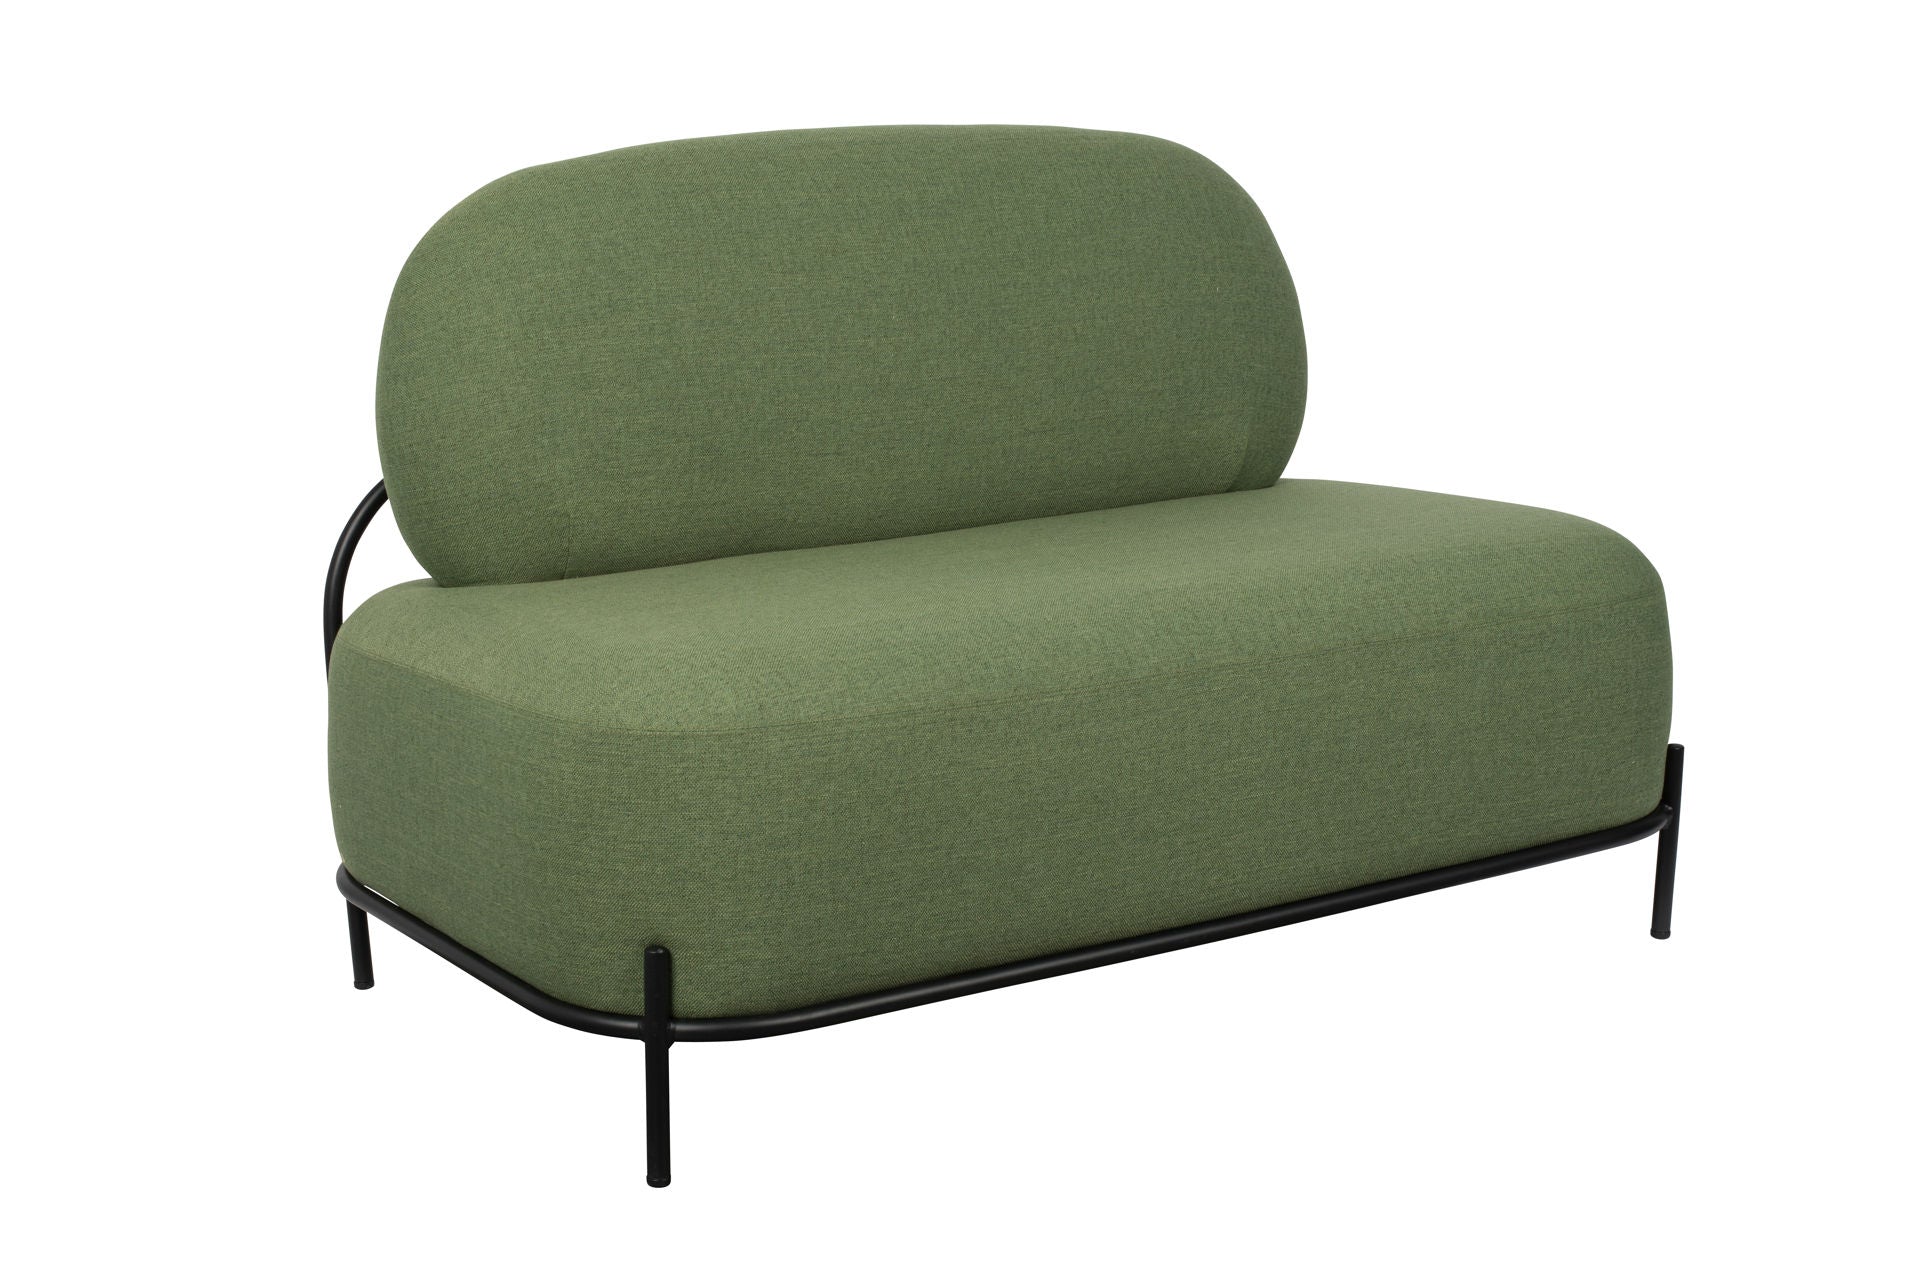 Nancy's Seven Hills Lounge Chair - Industrial - Green - Polyester, Plywood, Iron - 71.5 cm x 125 cm x 77 cm